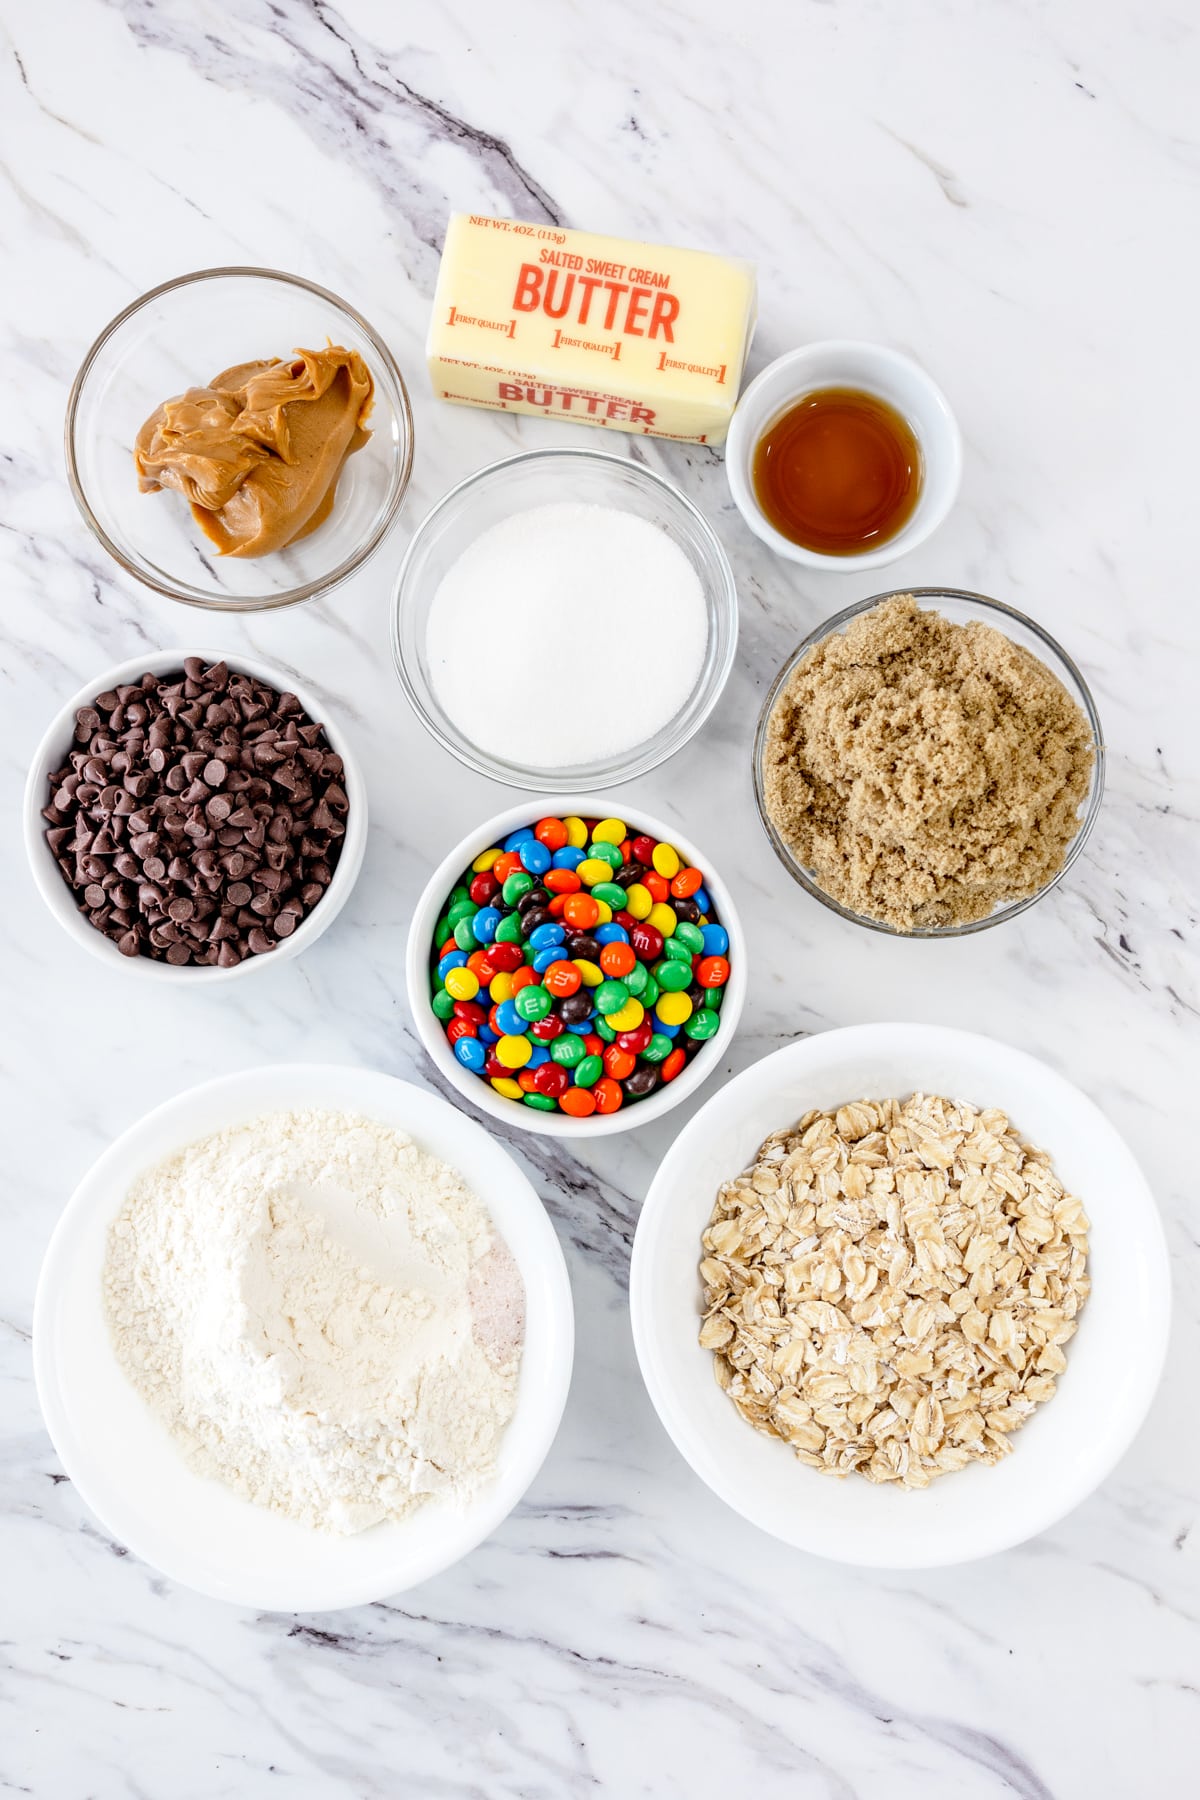 Top view of ingredients needed to make Monster Cookie Dough in small bowls on a baking tray.